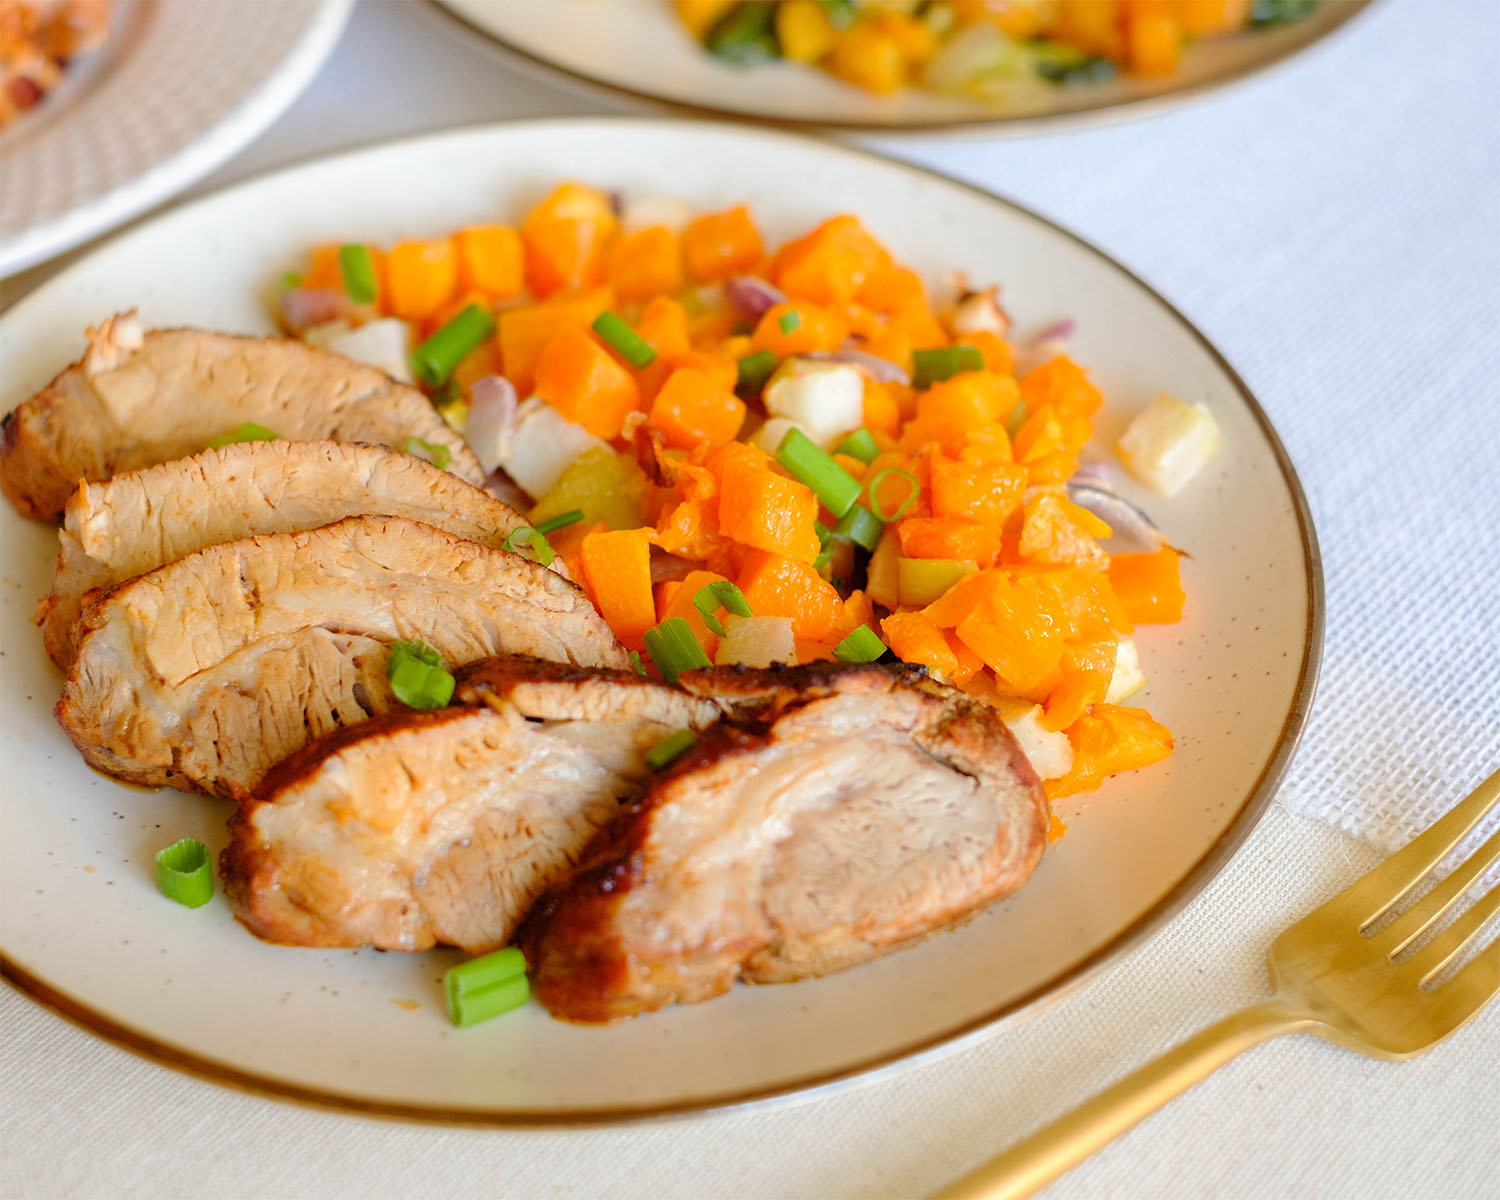 round plate with sliced pork tenderloin and diced butternut squash